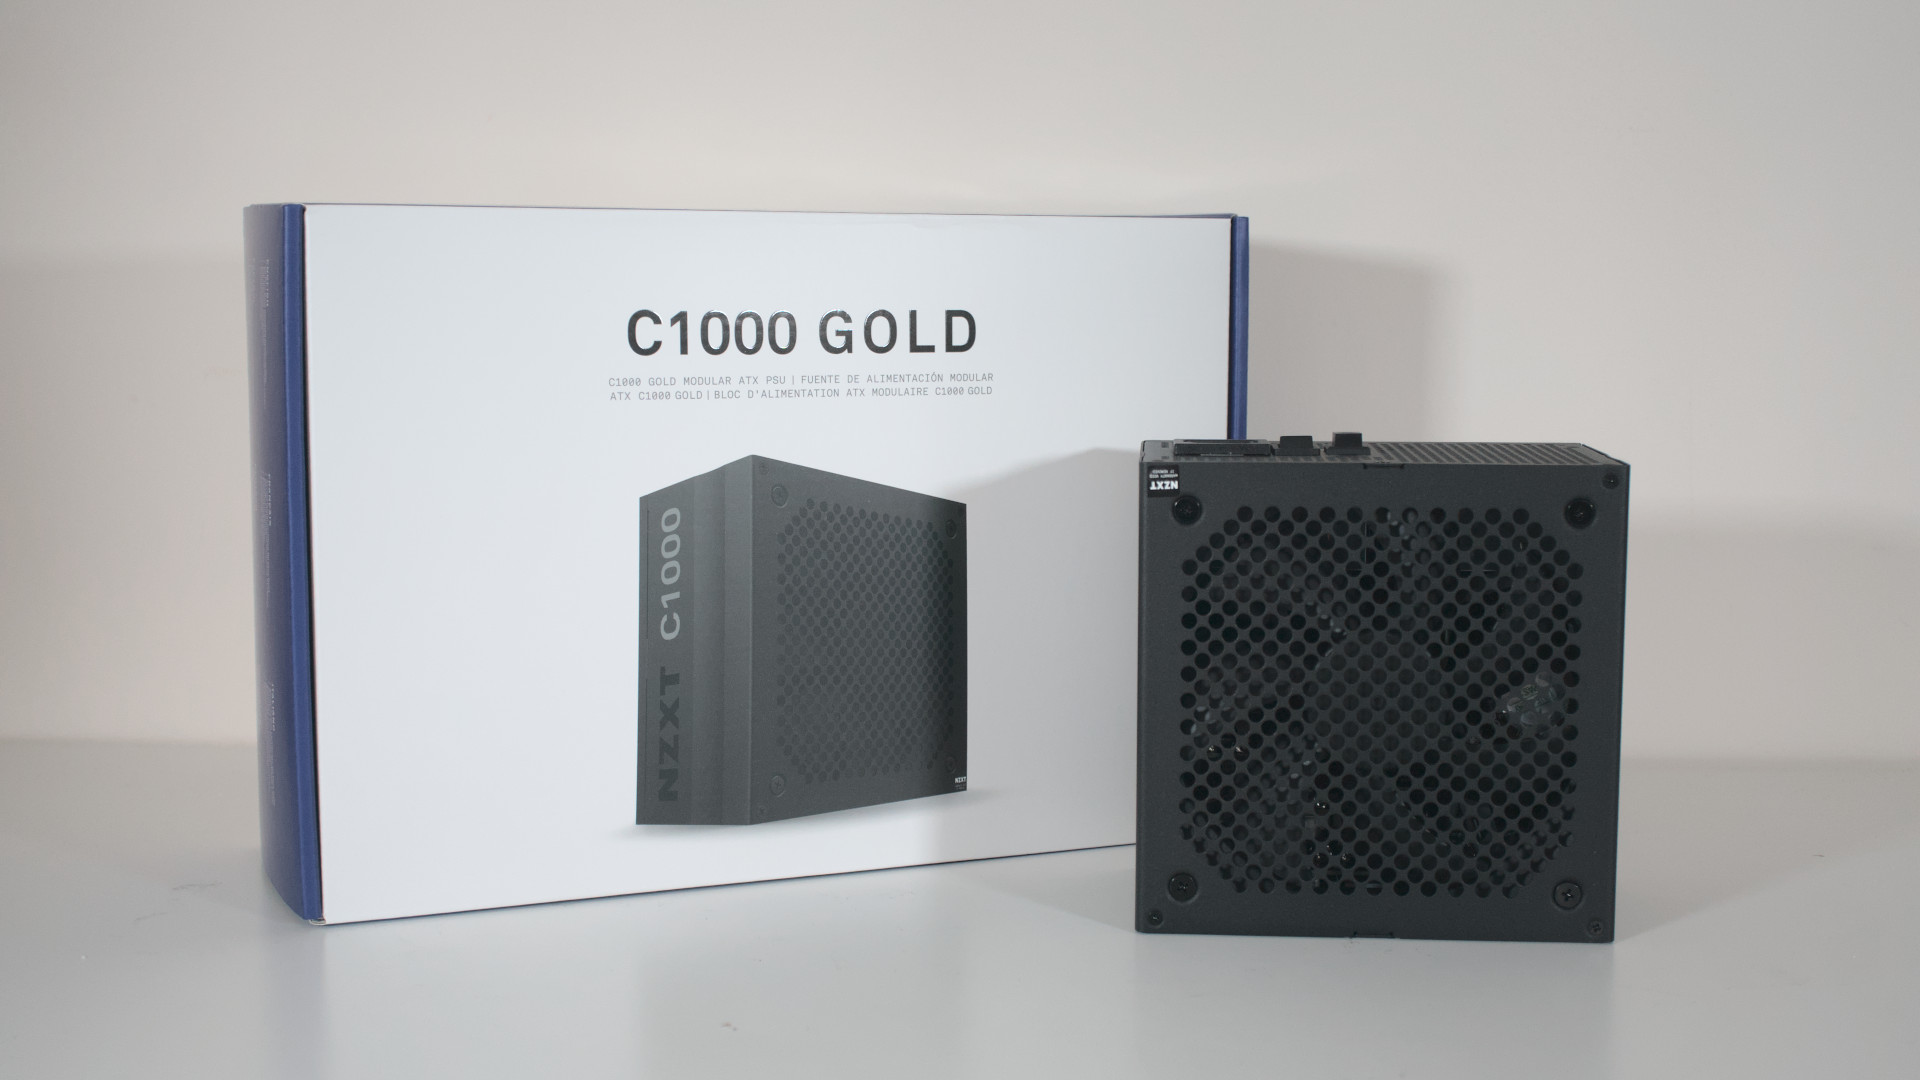 NZXT C1000 Gold review: Clean power for AMD Threadripper PC builds